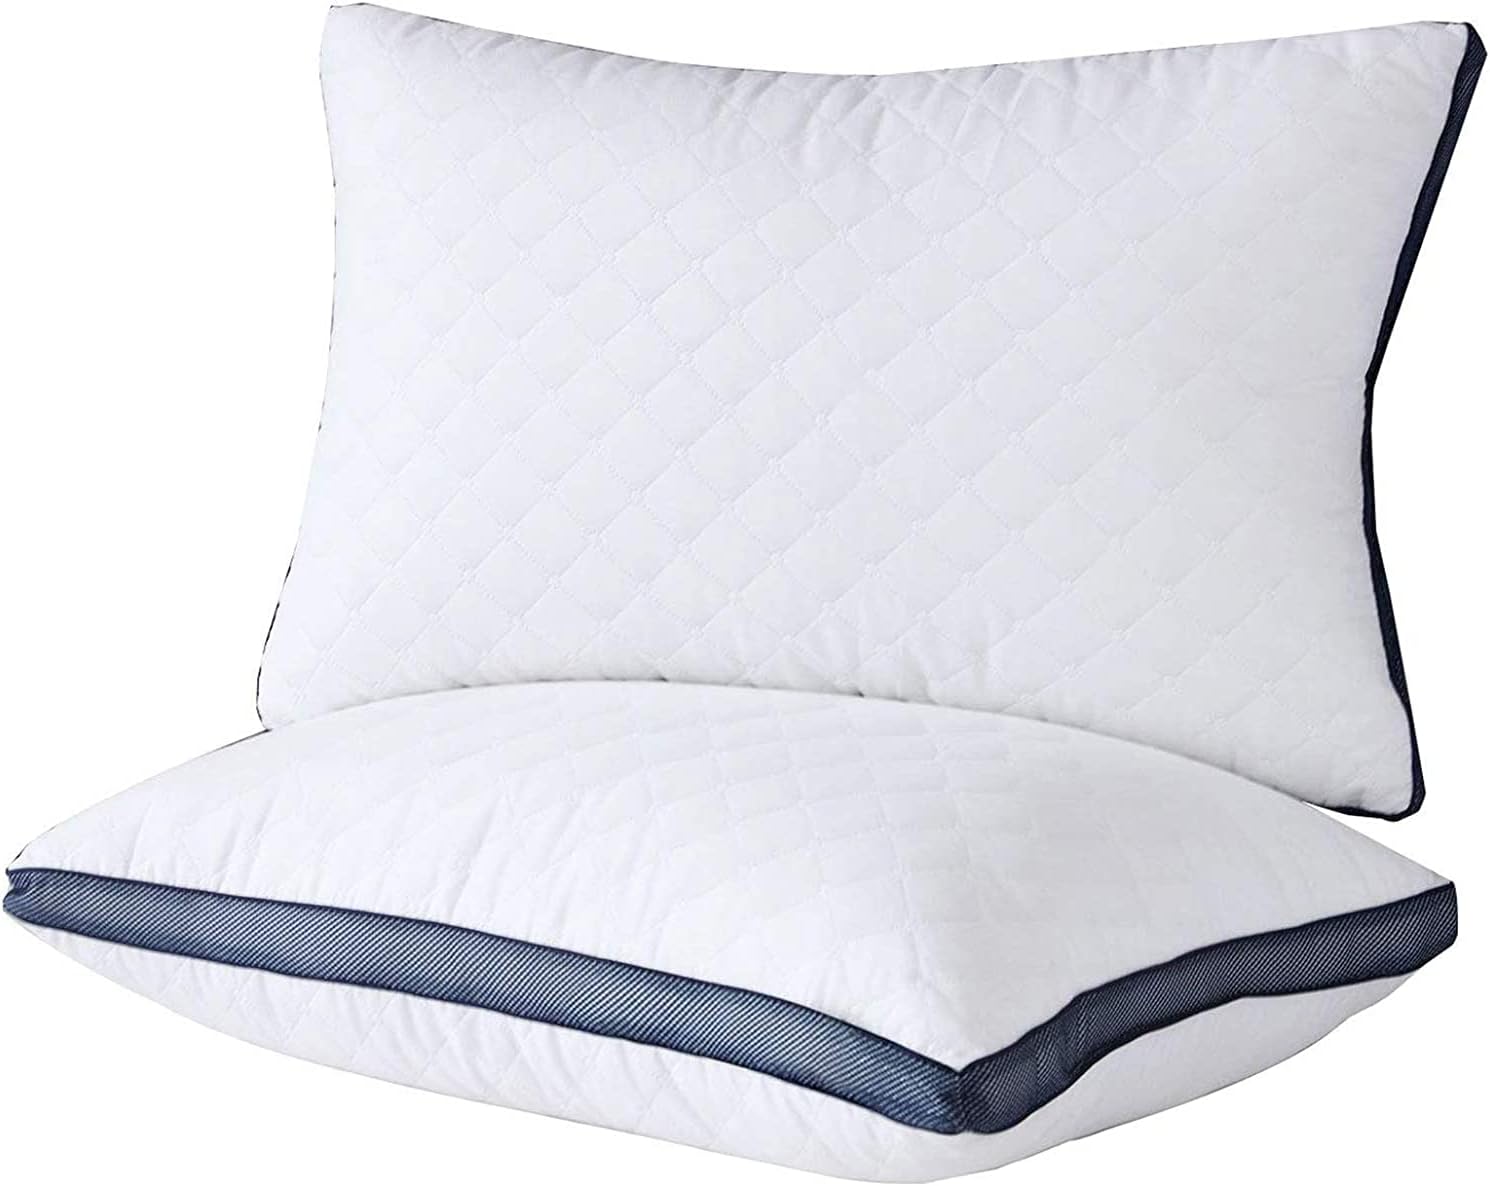 New Offers to Score! Meoflaw Pillows for Sleeping (2-Pack) at Luxury Hotel Quality